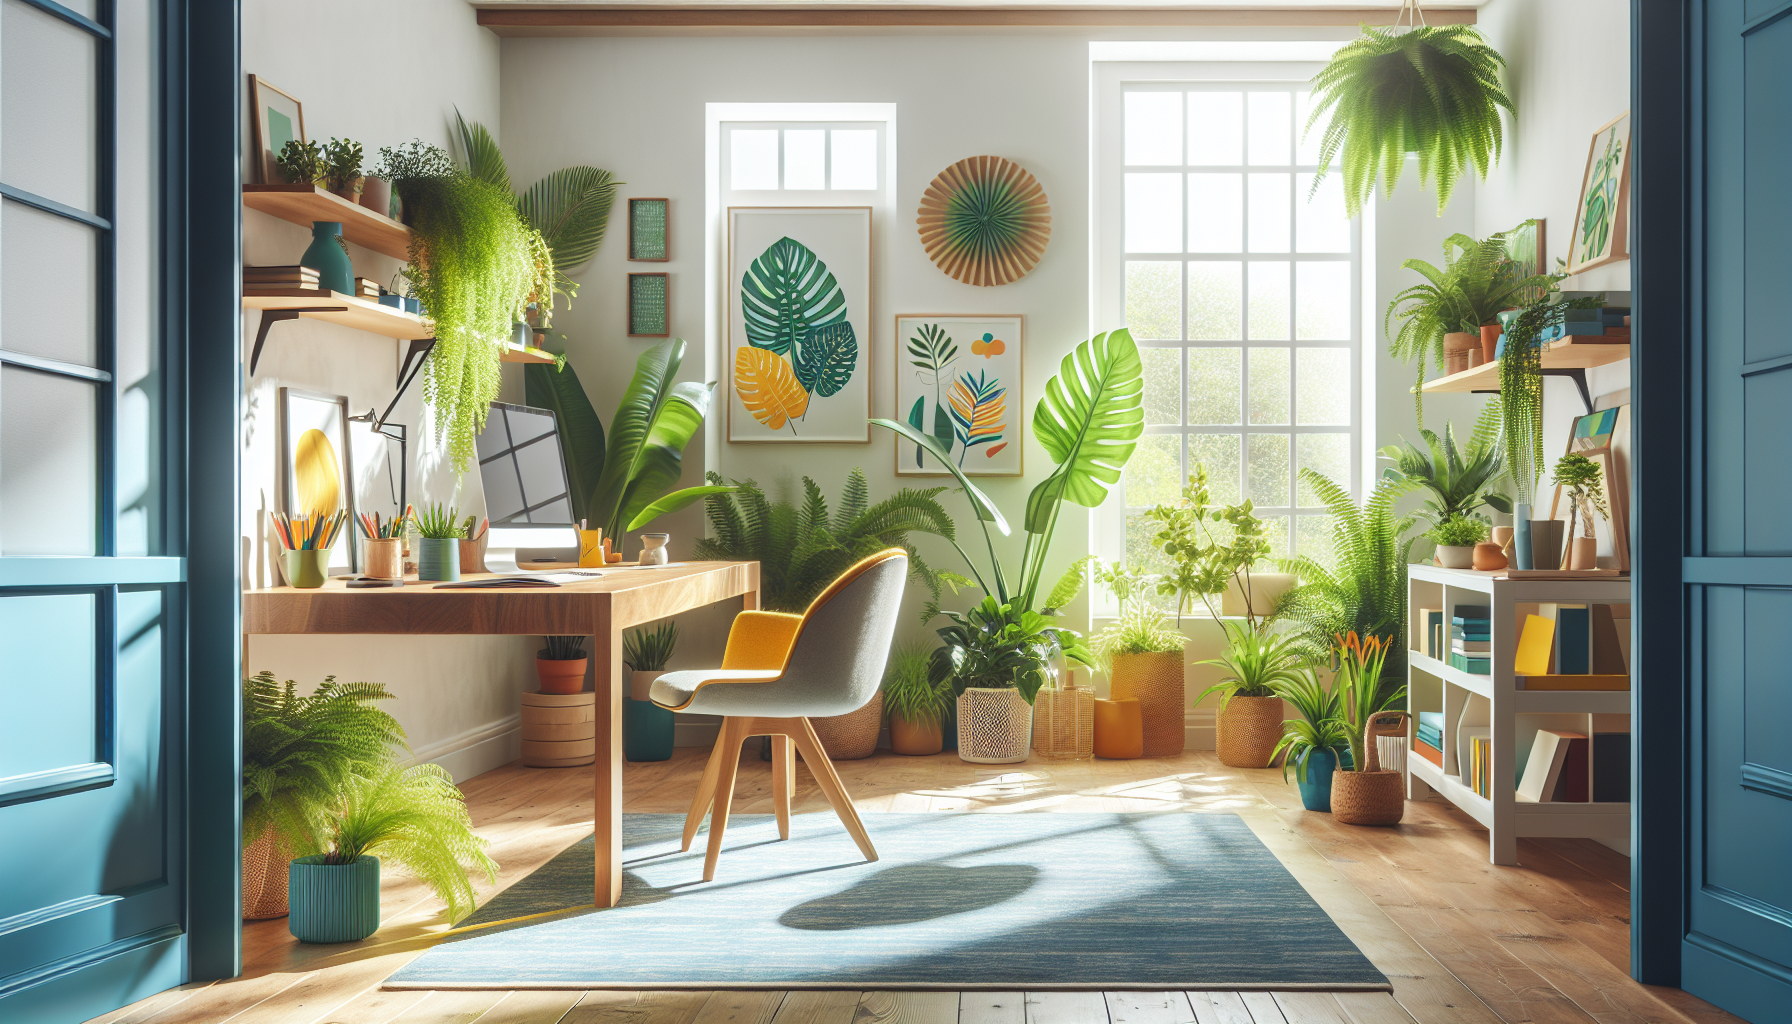 Home office with natural light, plants, and vibrant decor